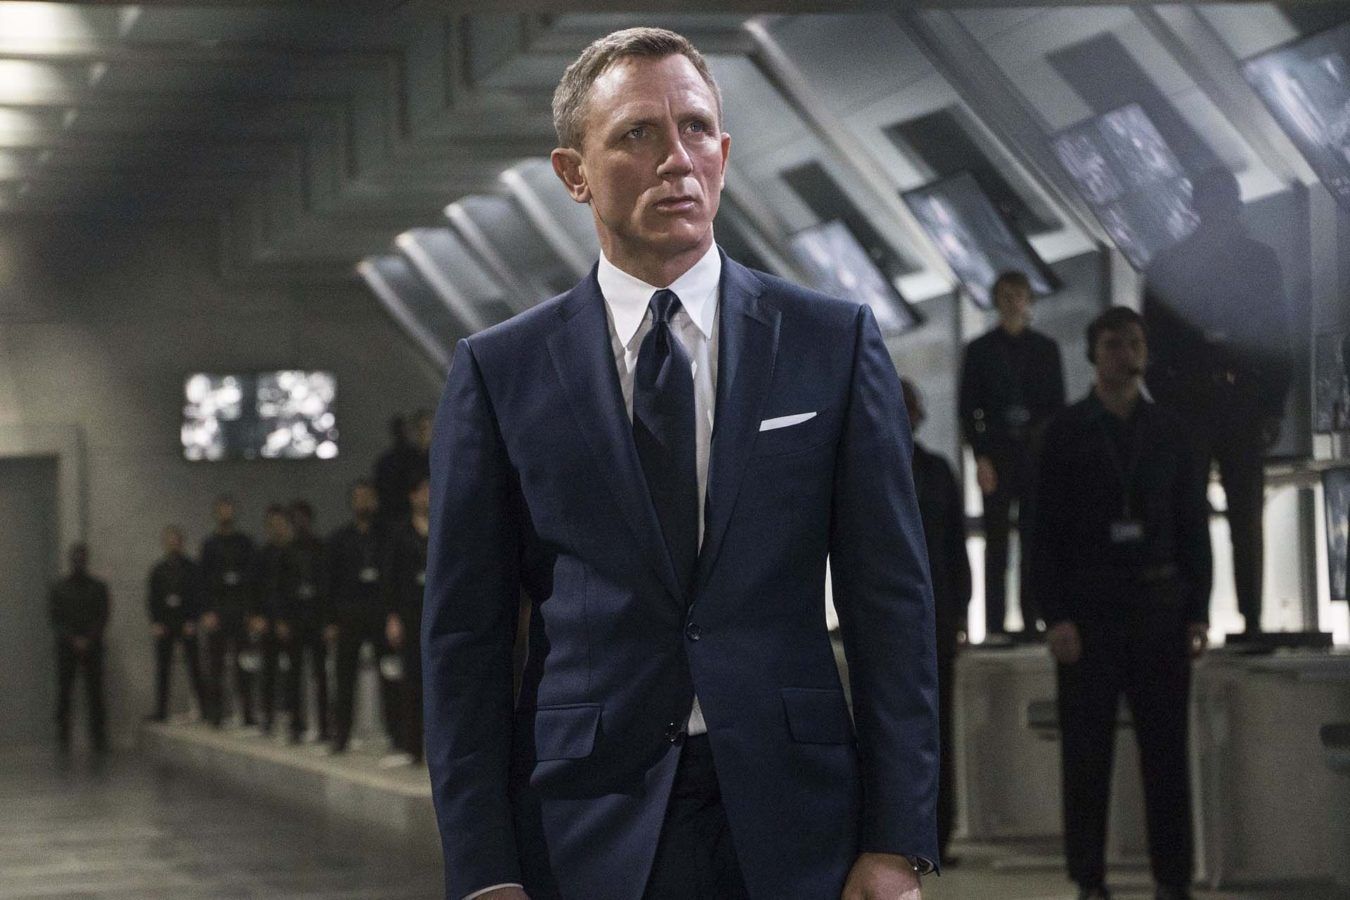 Why did Daniel Craig insist on wearing Massimo Alba’s suits in the latest James Bond movie?